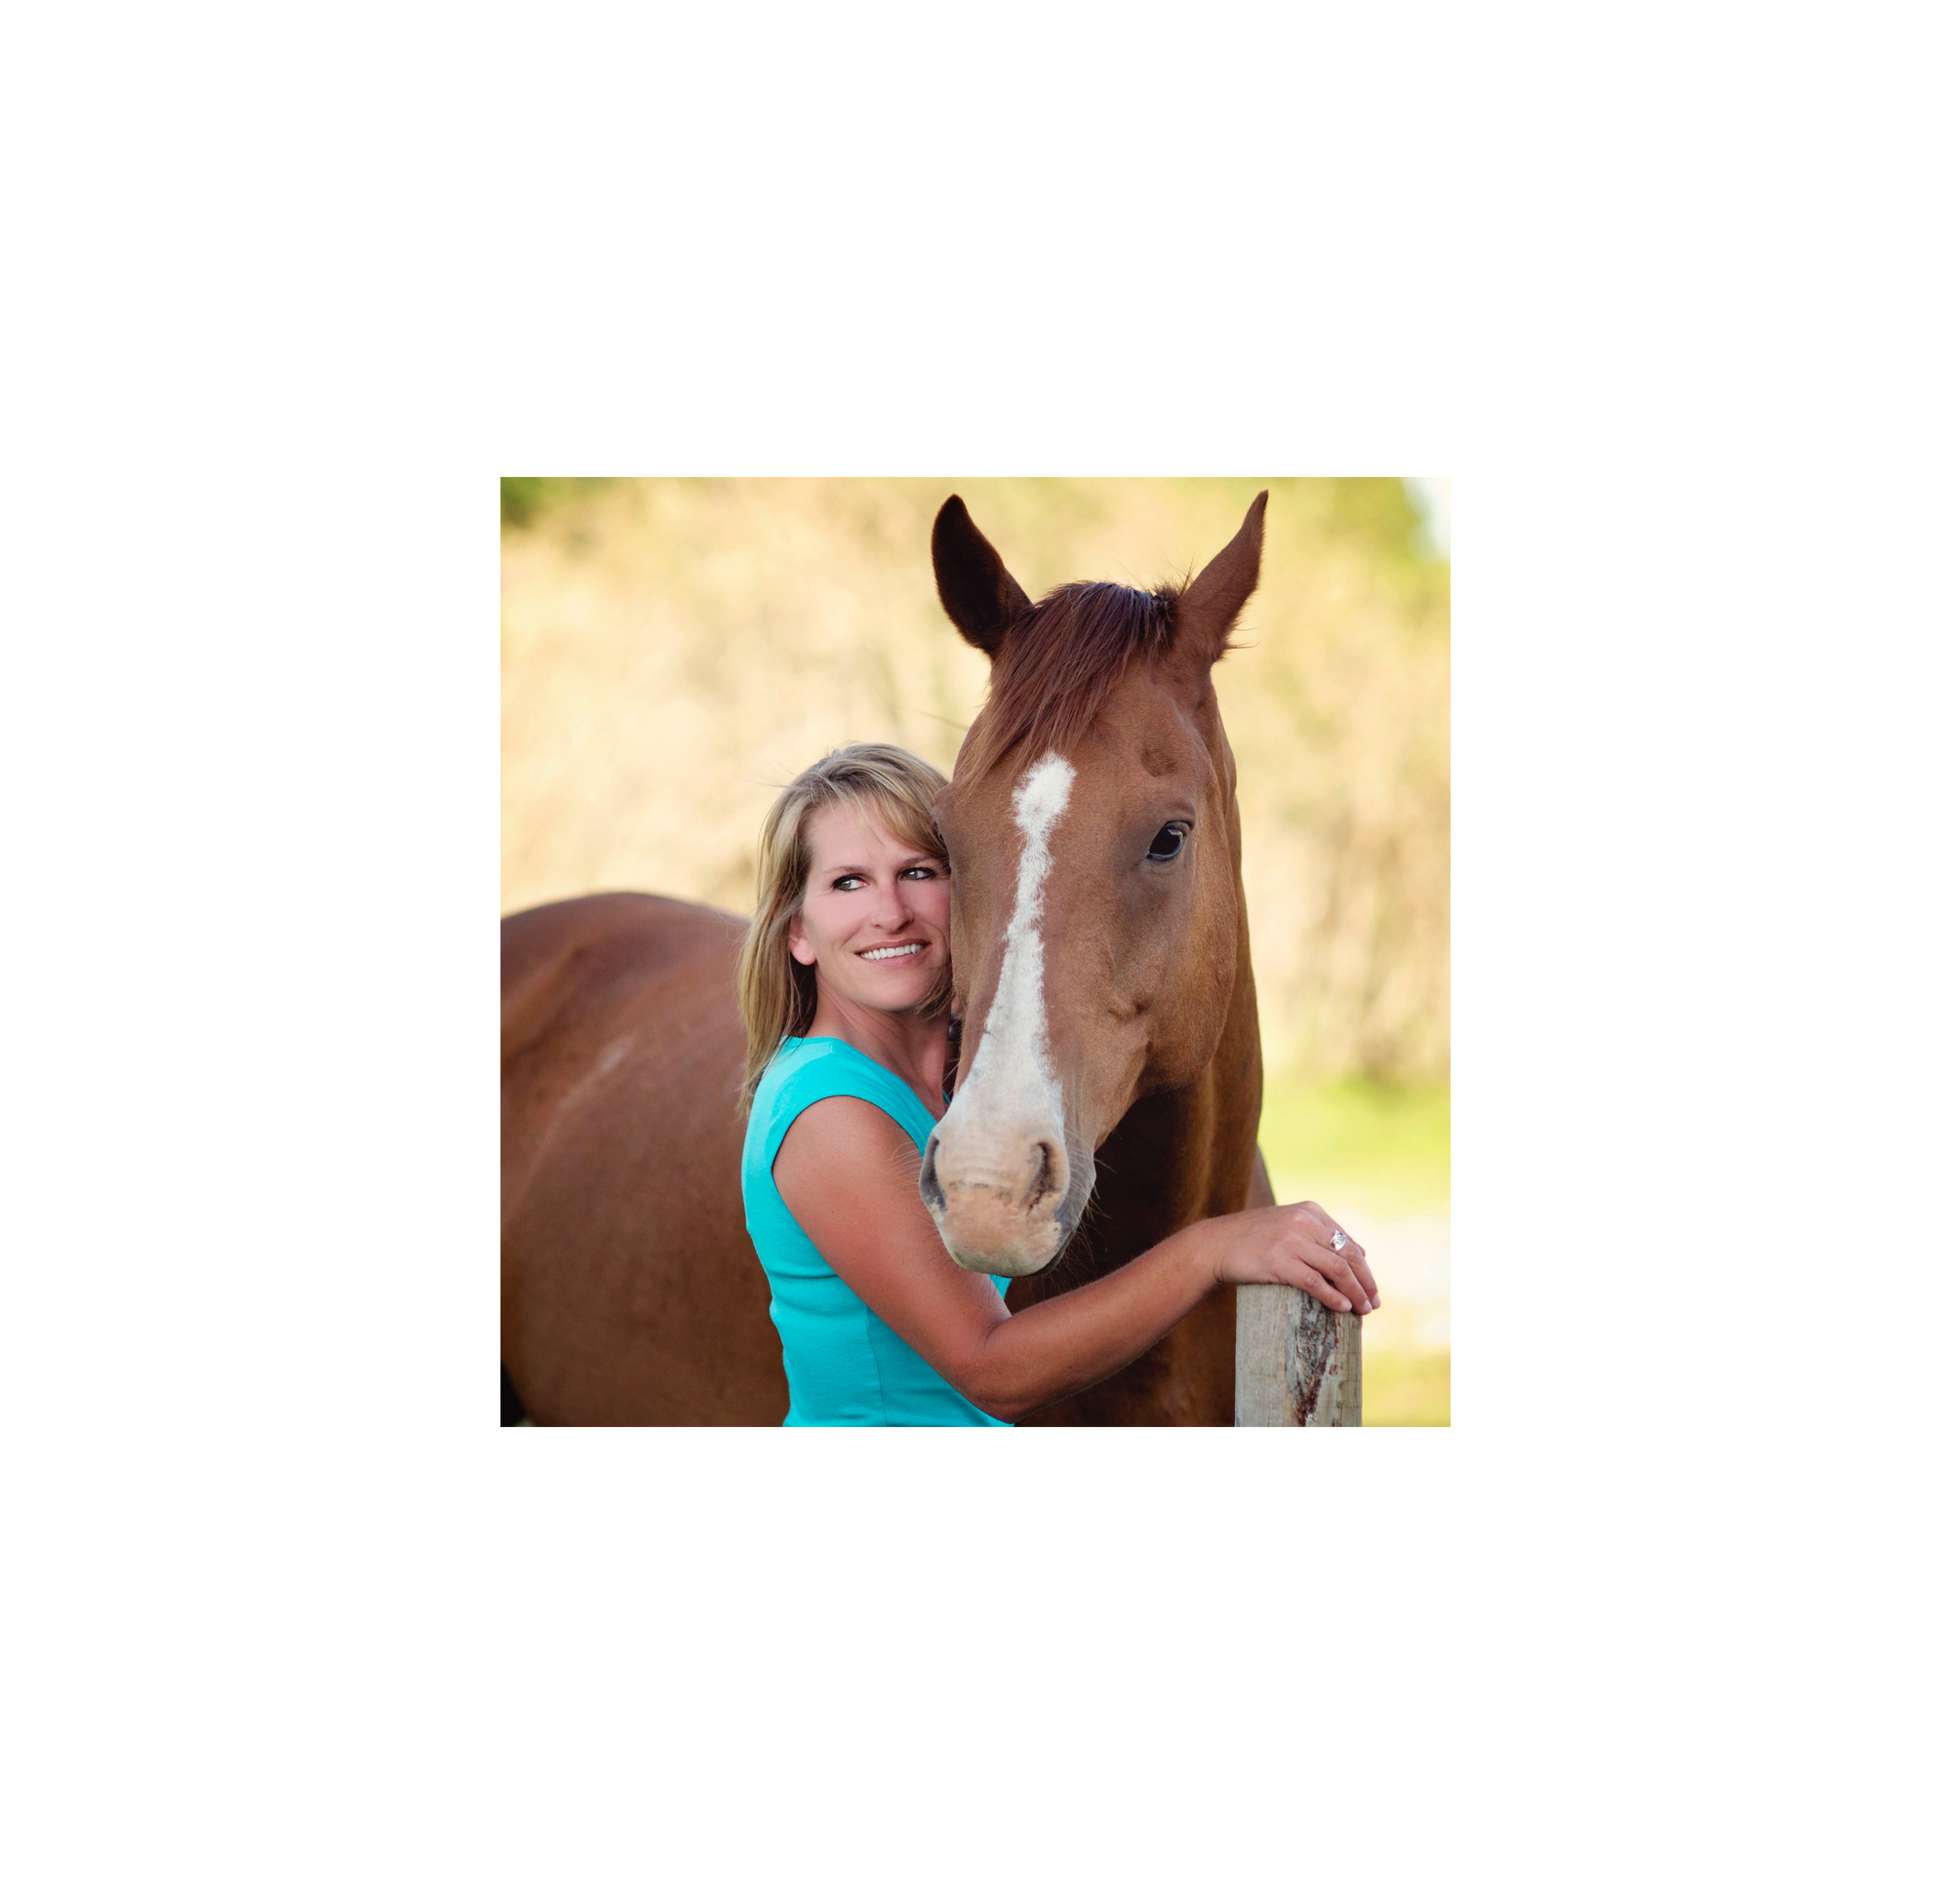 Fulfilling Your Purpose - Equine Connection